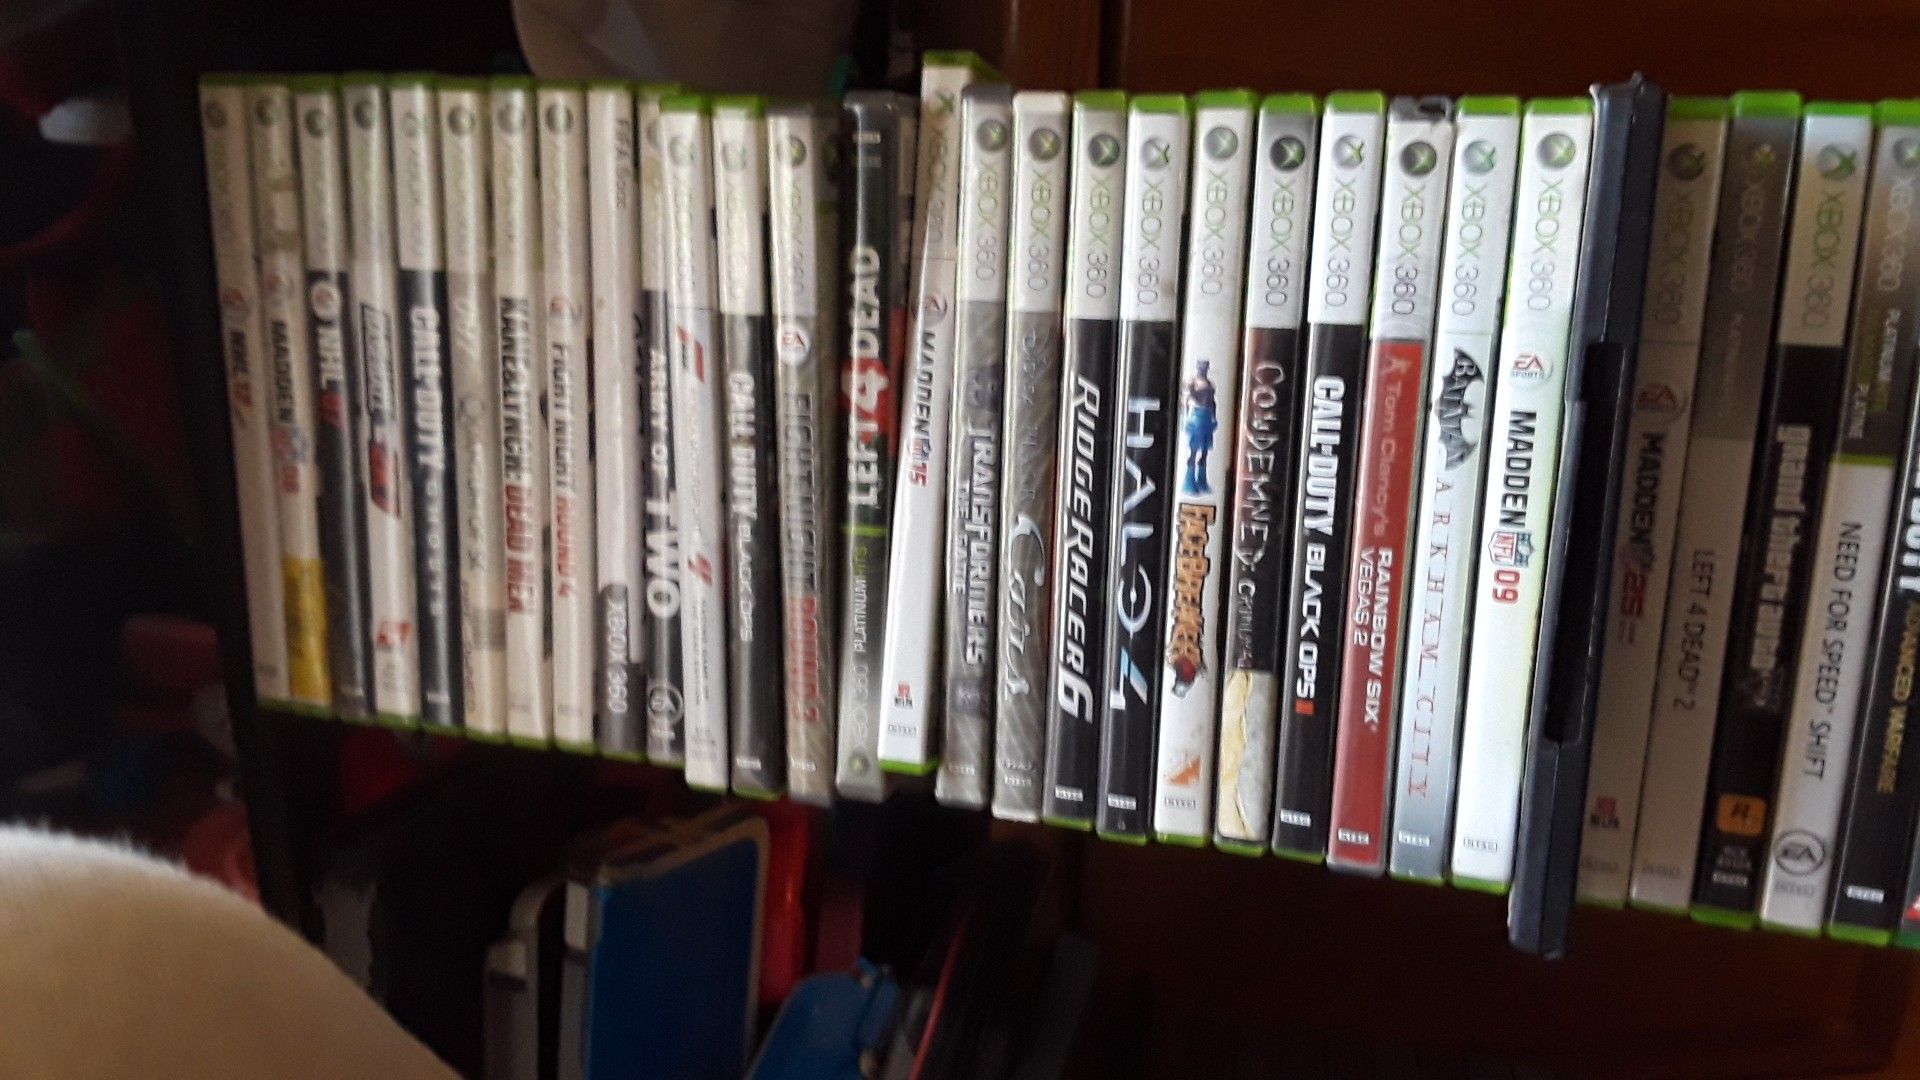 Xbox 360 sometimes doesnt read disk ...well most of the time...about 27 games all for free